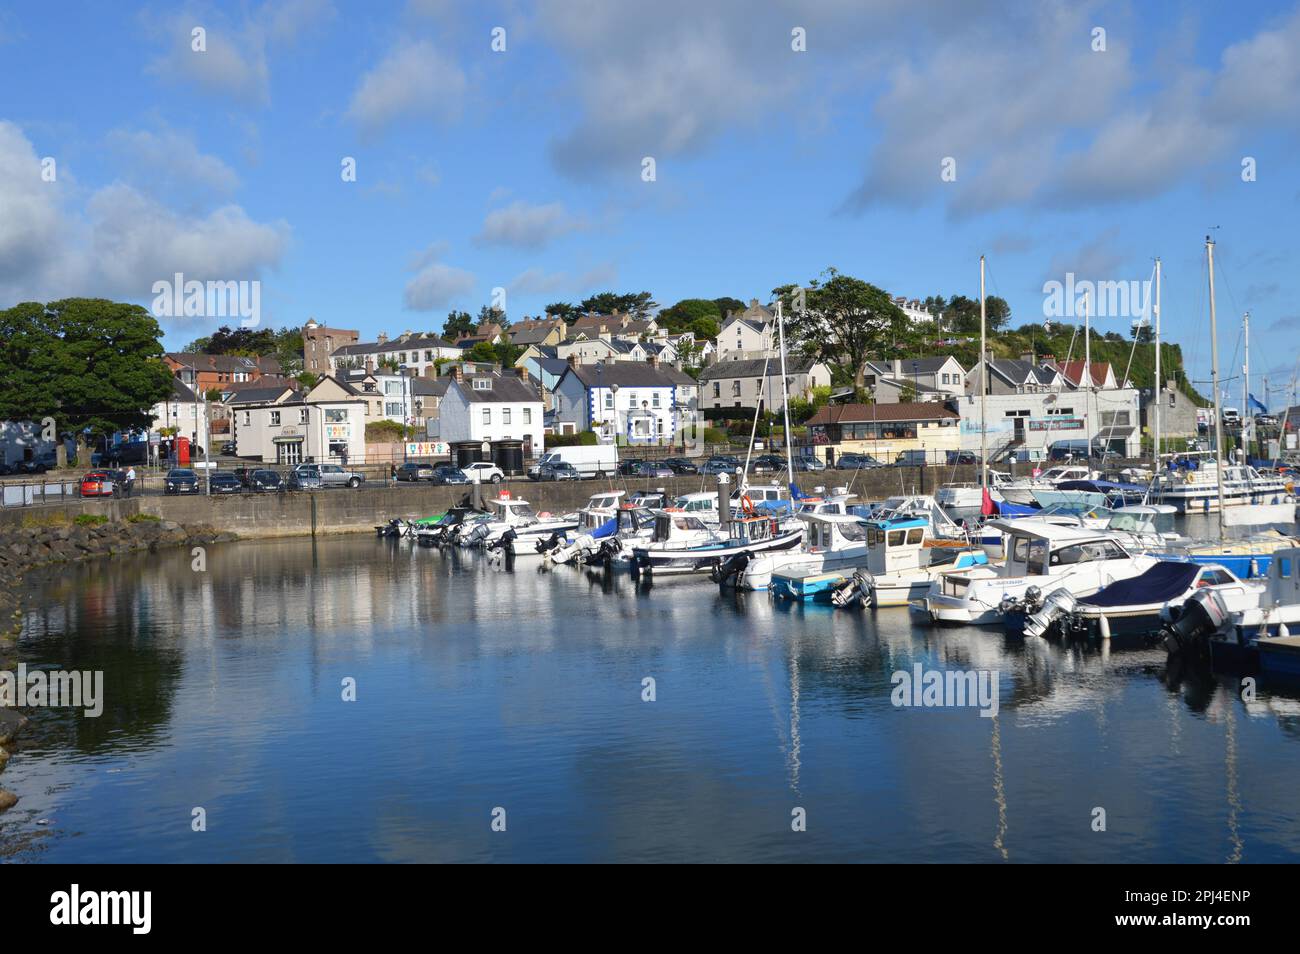 Northern Ireland, County Antrim, Ballycastle:  fishing boats reflected in the waters of the harbour, overlooked by the rising ground of the town. Stock Photo